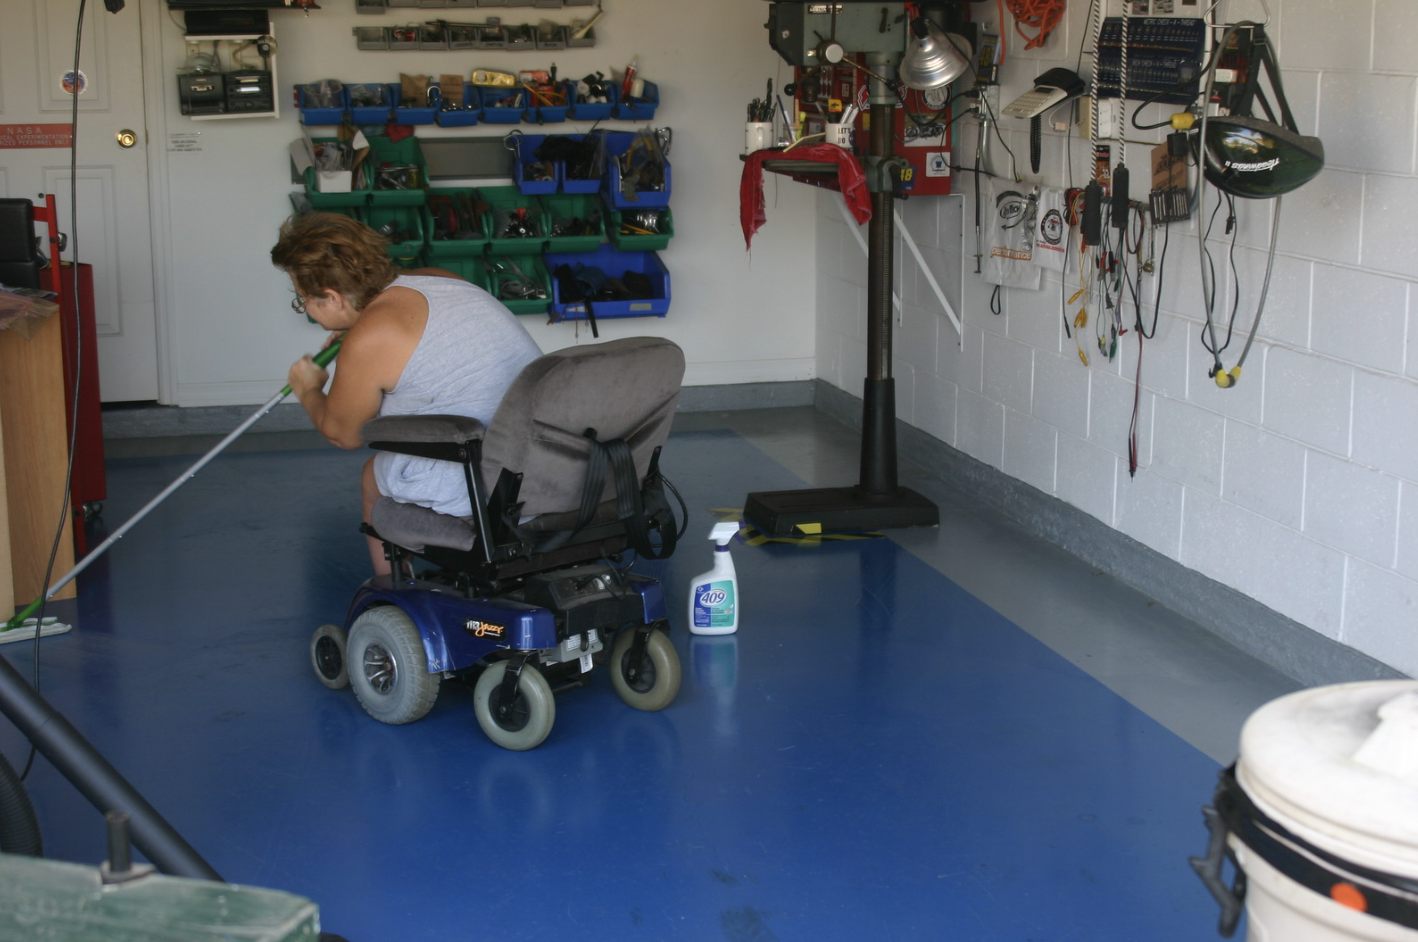 Woman in a wheelchair cleaning the floor. | Source: Flickr